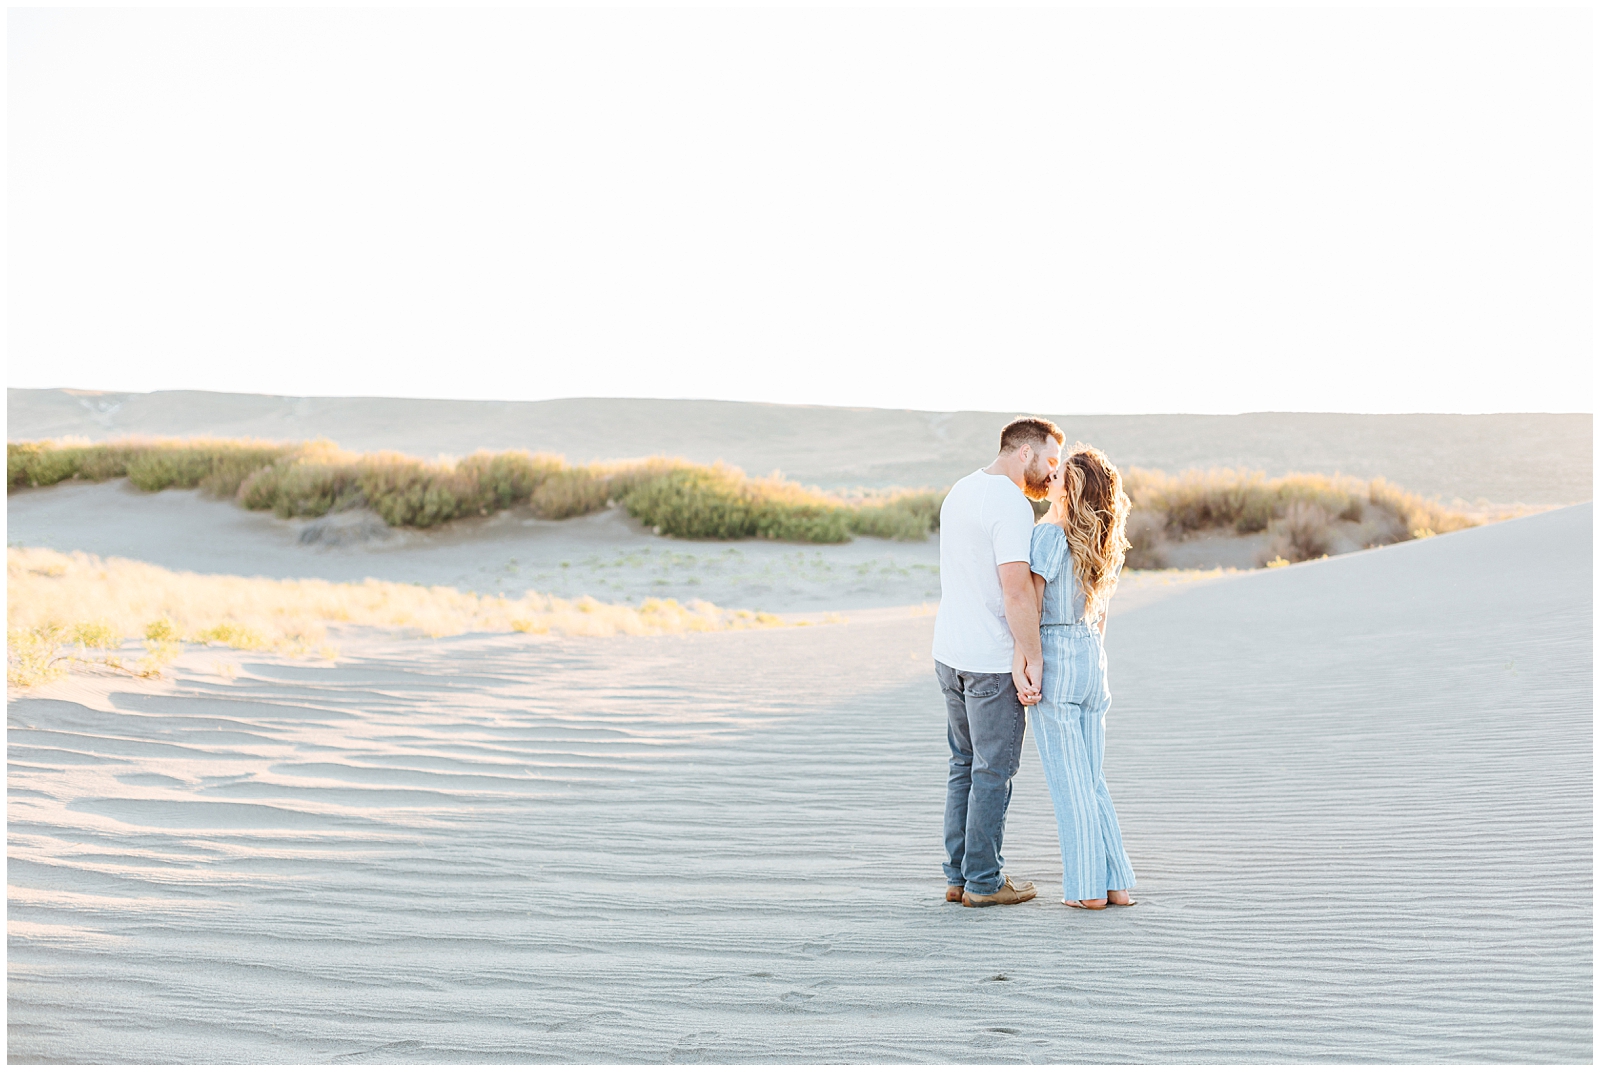 Dreamy Beachy Sand Dunes Engagement Session at Golden Hour